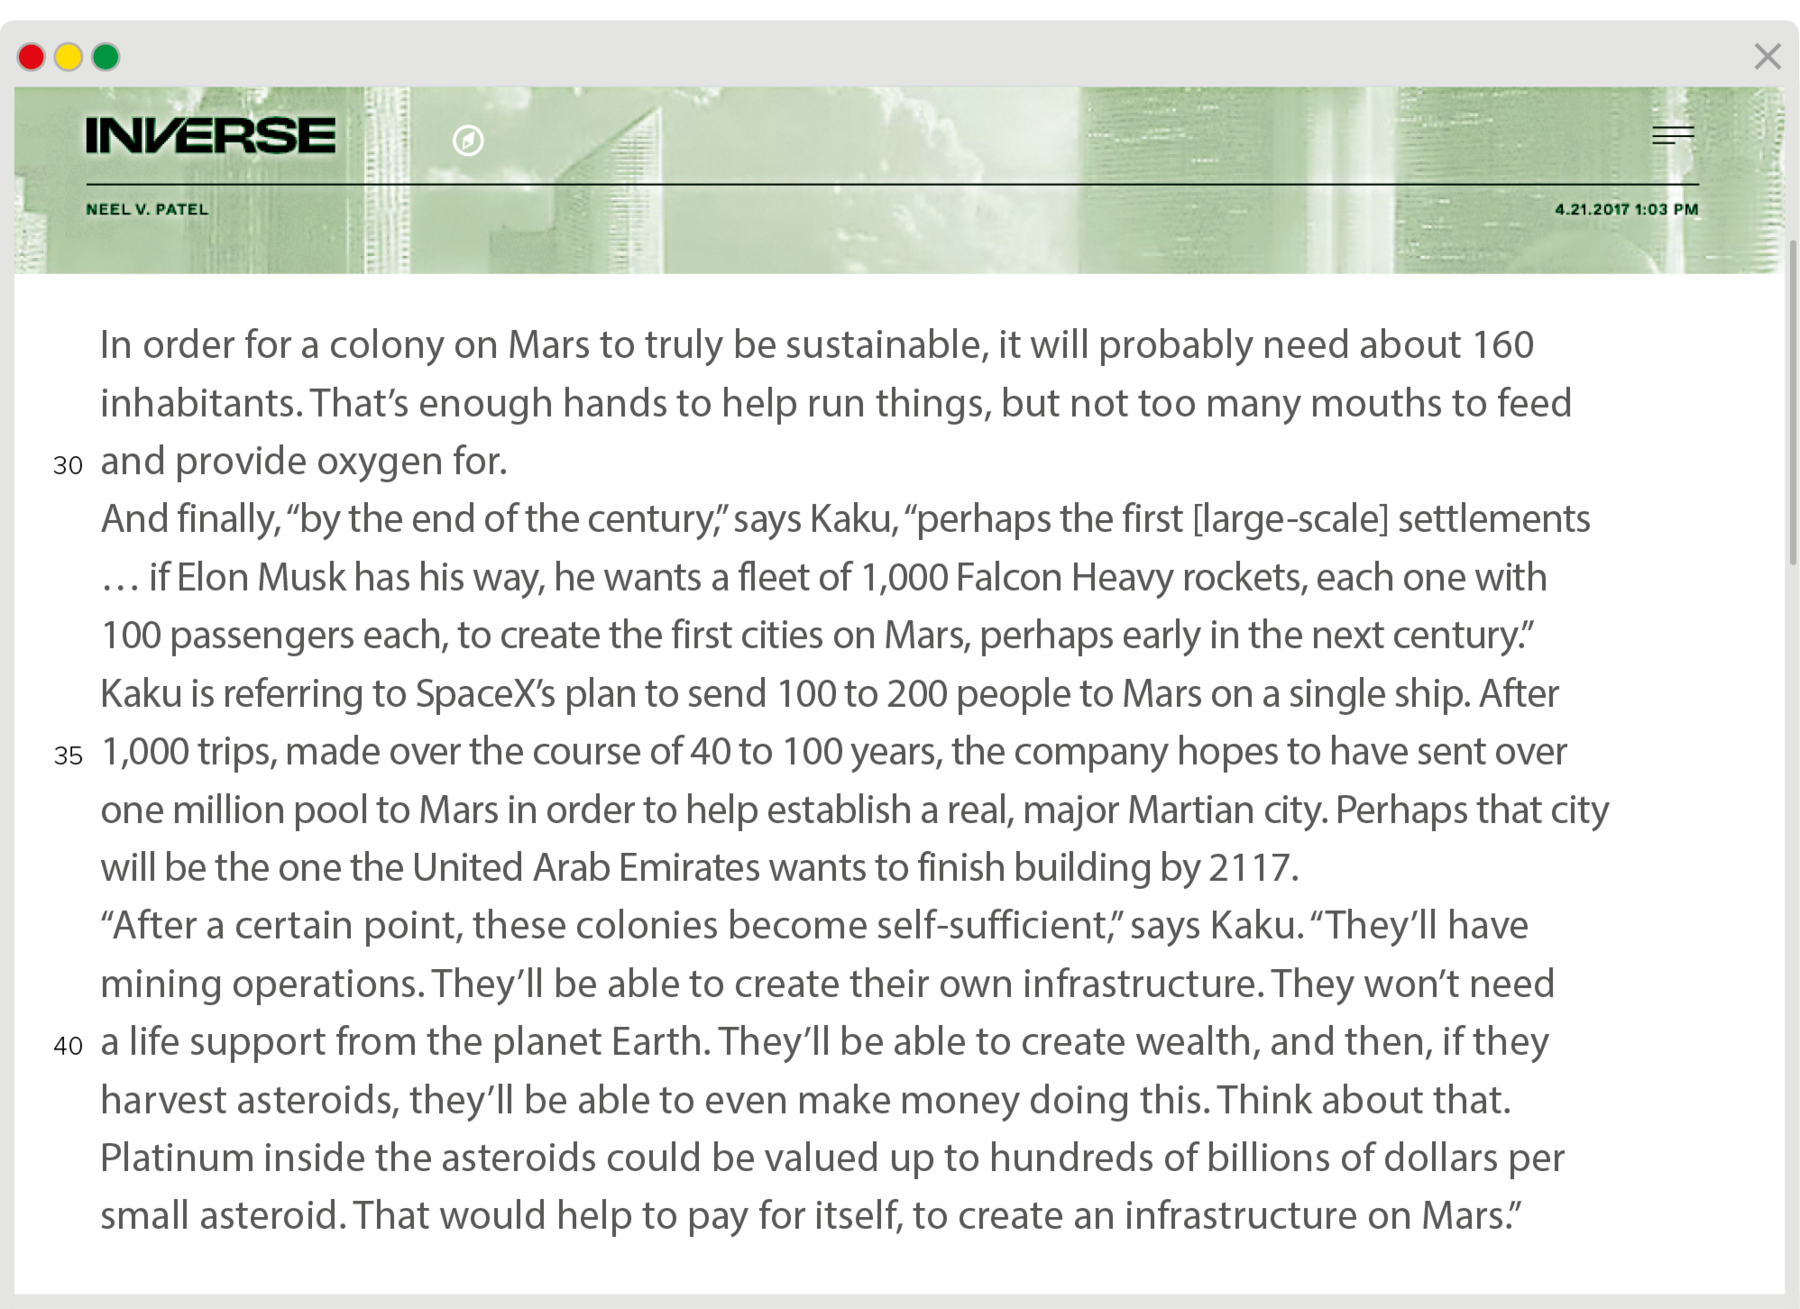 Reprodução de página da internet. Na parte superior, fundo em verde. À esquerda, texto em preto: Inverse, Neel V. Patel. Abaixo o seguinte texto. In order for a colony on Mars to truly be sustainable, it will probably need about 160 inhabitants. That’s enough hands to help run things, but not too many mouths to feed and provide oxygen for. And finally, “by the end of the century,” says Kaku, “perhaps the first [large-scale] settlements … if Elon Musk has his way, he wants a fleet of 1,000 Falcon Heavy rockets, each one with 100 passengers each, to create the first cities on Mars, perhaps early in the next century.” Kaku is referring to SpaceX’s plan to send 100 to 200 people to Mars on a single ship. After 1,000 trips, made over the course of 40 to 100 years, the company hopes to have sent over one million pool to Mars in order to help establish a real, major Martian city. Perhaps that city will be the one the United Arab Emirates wants to finish building by 2117. “After a certain point, these colonies become self-sufficient,” says Kaku. “They’ll have mining operations. They’ll be able to create their own infrastructure. They won’t need a life support from the planet Earth. They’ll be able to create wealth, and then, if they harvest asteroids, they’ll be able to even make money doing this. Think about that. Platinum inside the asteroids could be valued up to hundreds of billions of dollars per small asteroid. That would help to pay for itself, to create an infrastructure on Mars.”